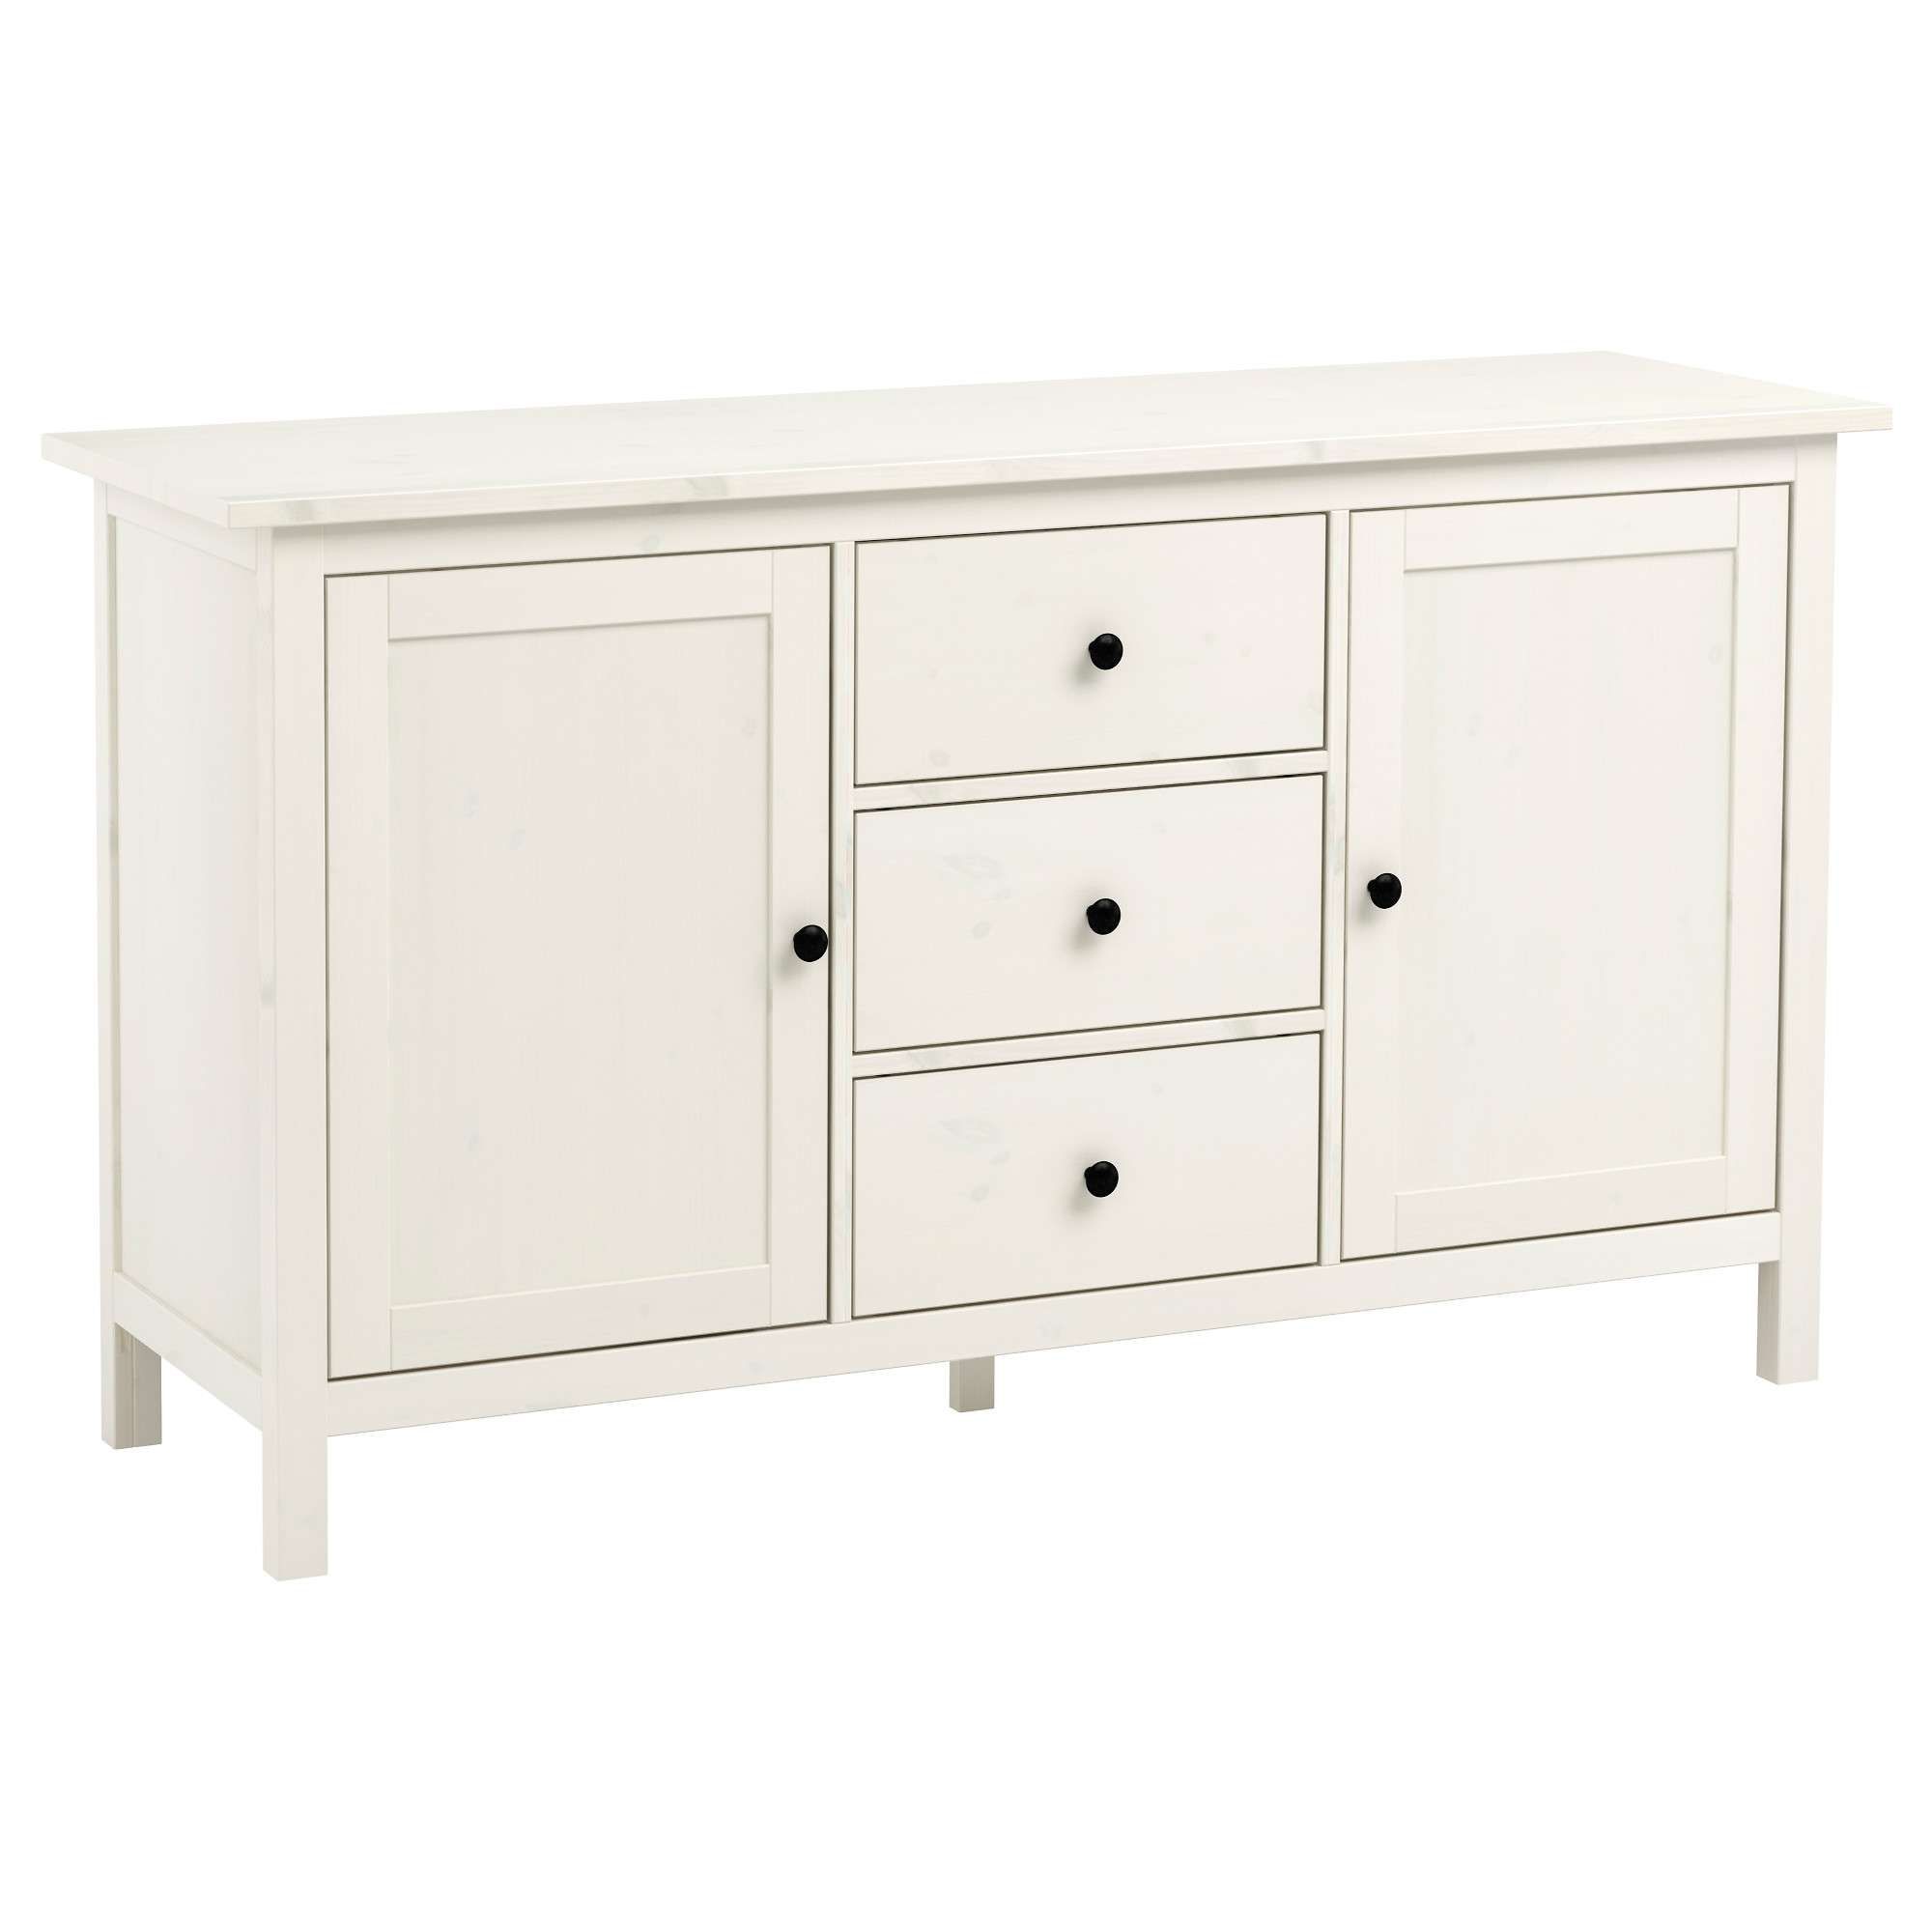 Hemnes Sideboard – White Stain – Ikea Pertaining To Tall Narrow Sideboards (View 2 of 20)